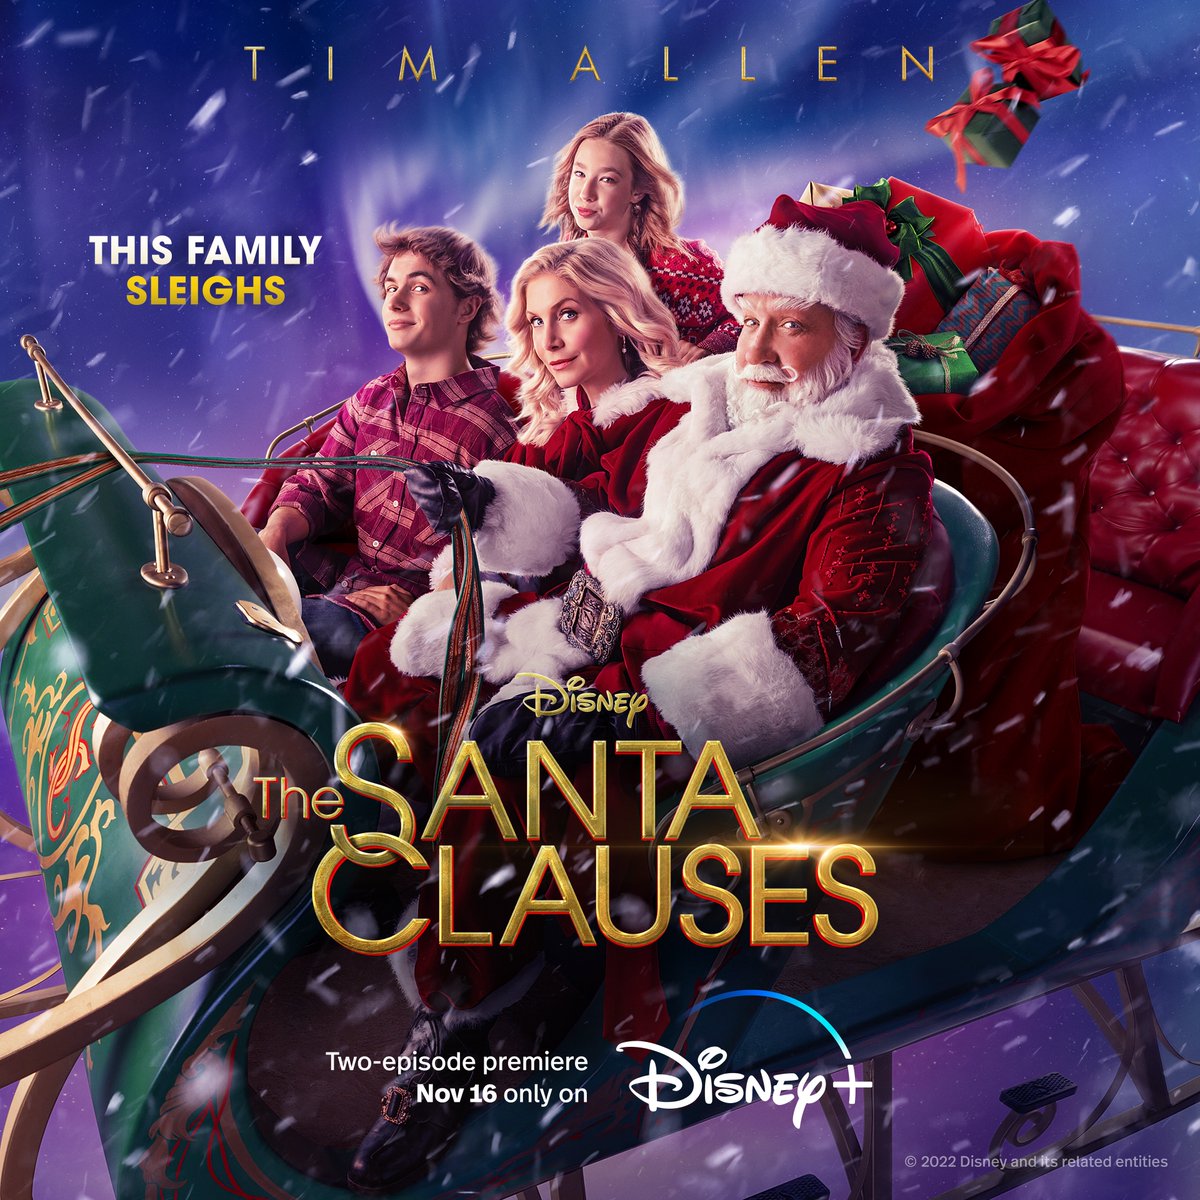 Man with the brag, meet the man with the bag.🎅The two-episode premiere of #TheSantaClauses, a brand-new Original series starring Tim Allen, is streaming tomorrow, November 16 on @DisneyPlus!